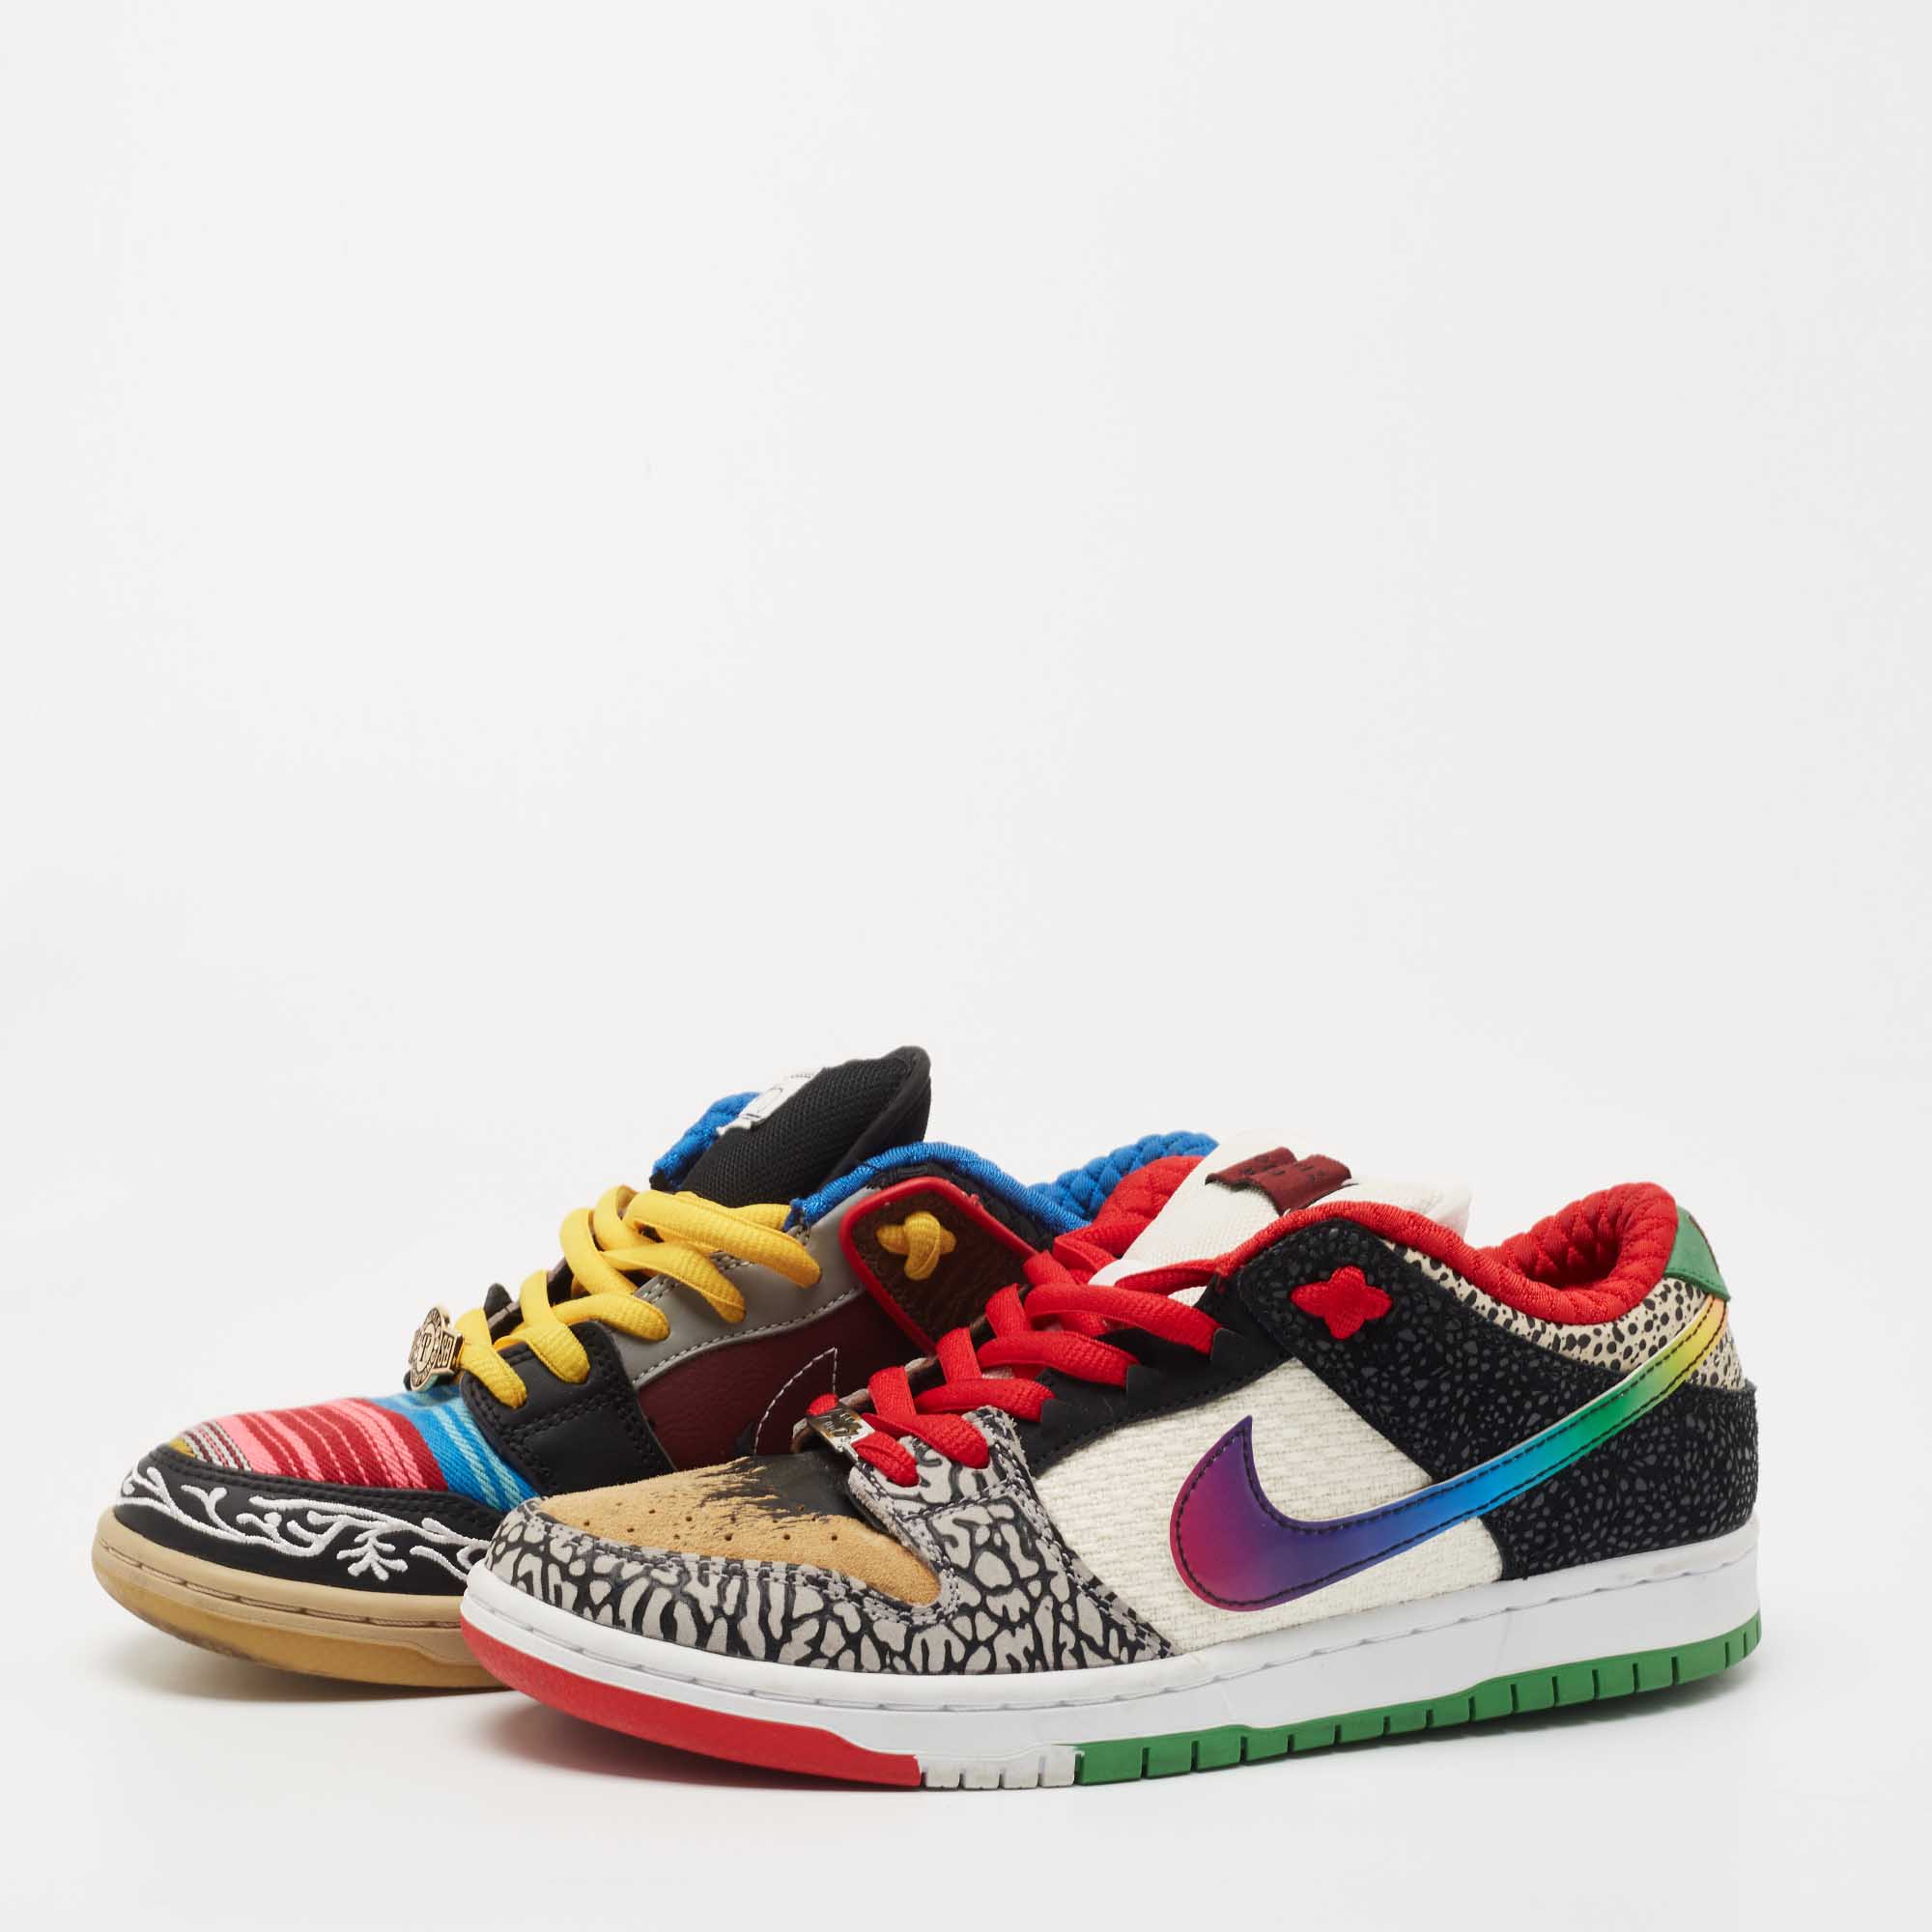 

Nike SB Dunk Multicolor Leather Low Top What The Paul Sneakers Size